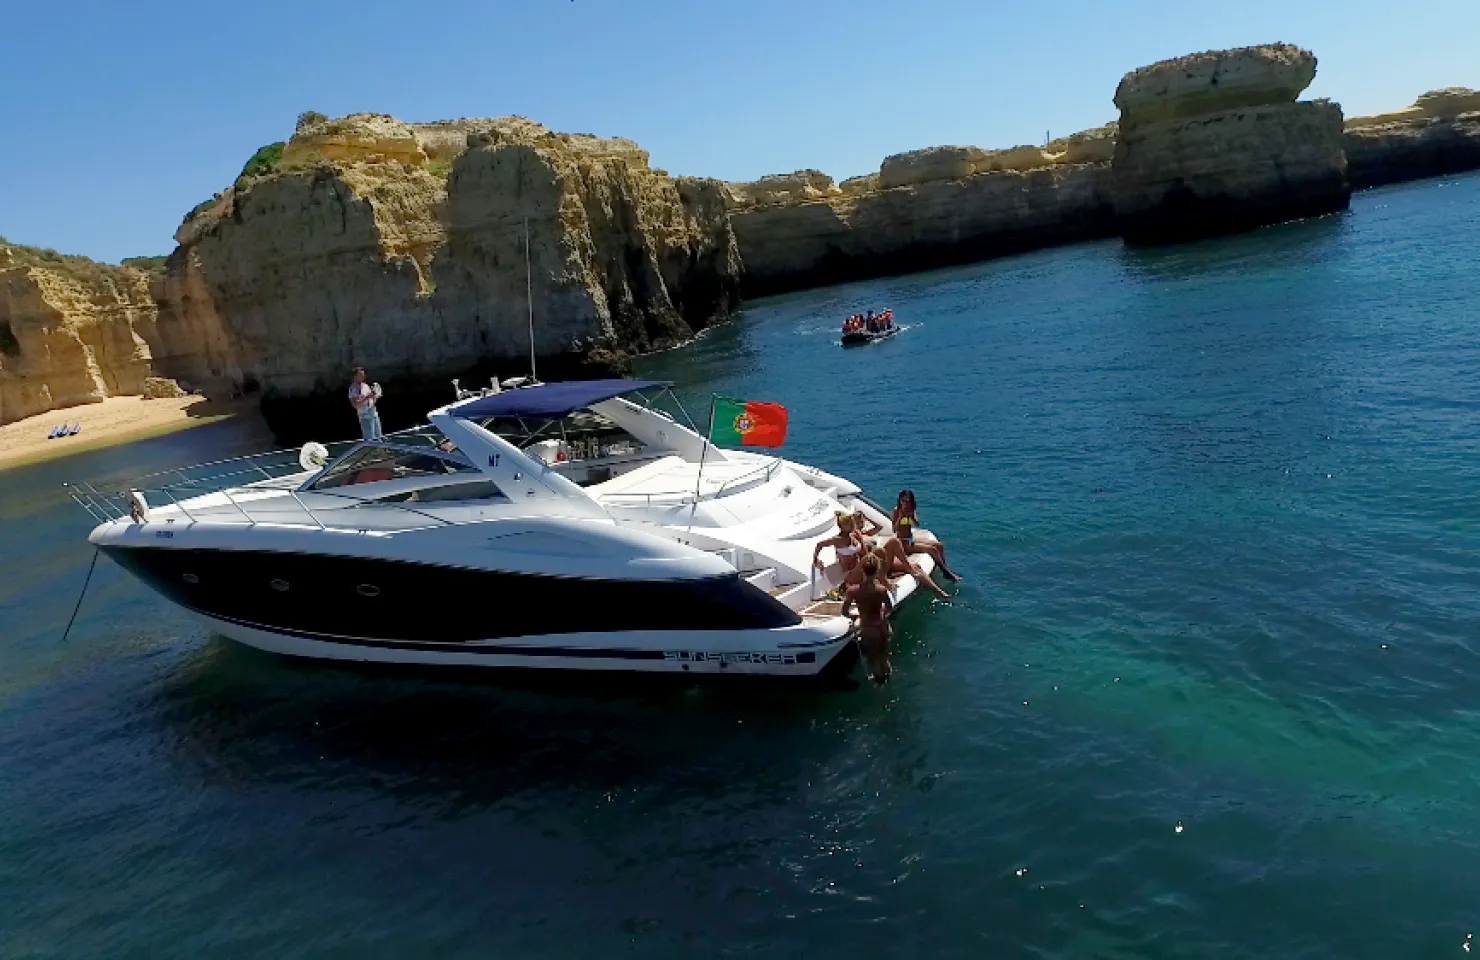 Afternoon Luxury Cruise - Yacht Hire Algarve